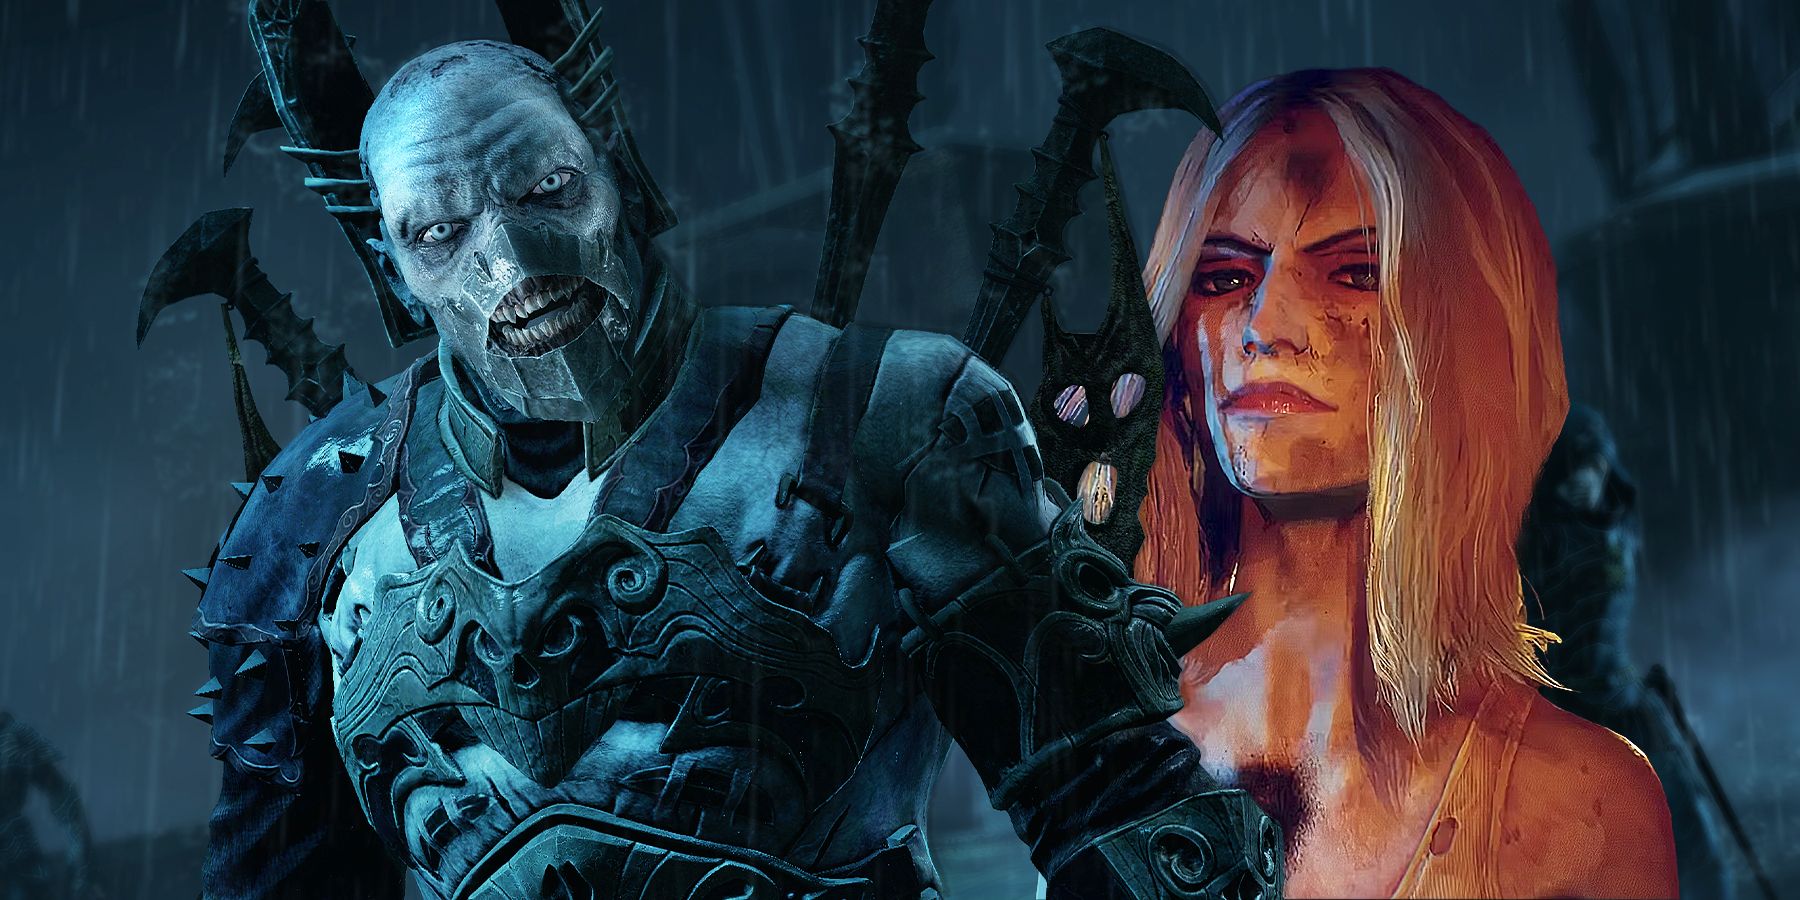 Judas behind an Orc from Shadow of Mordor